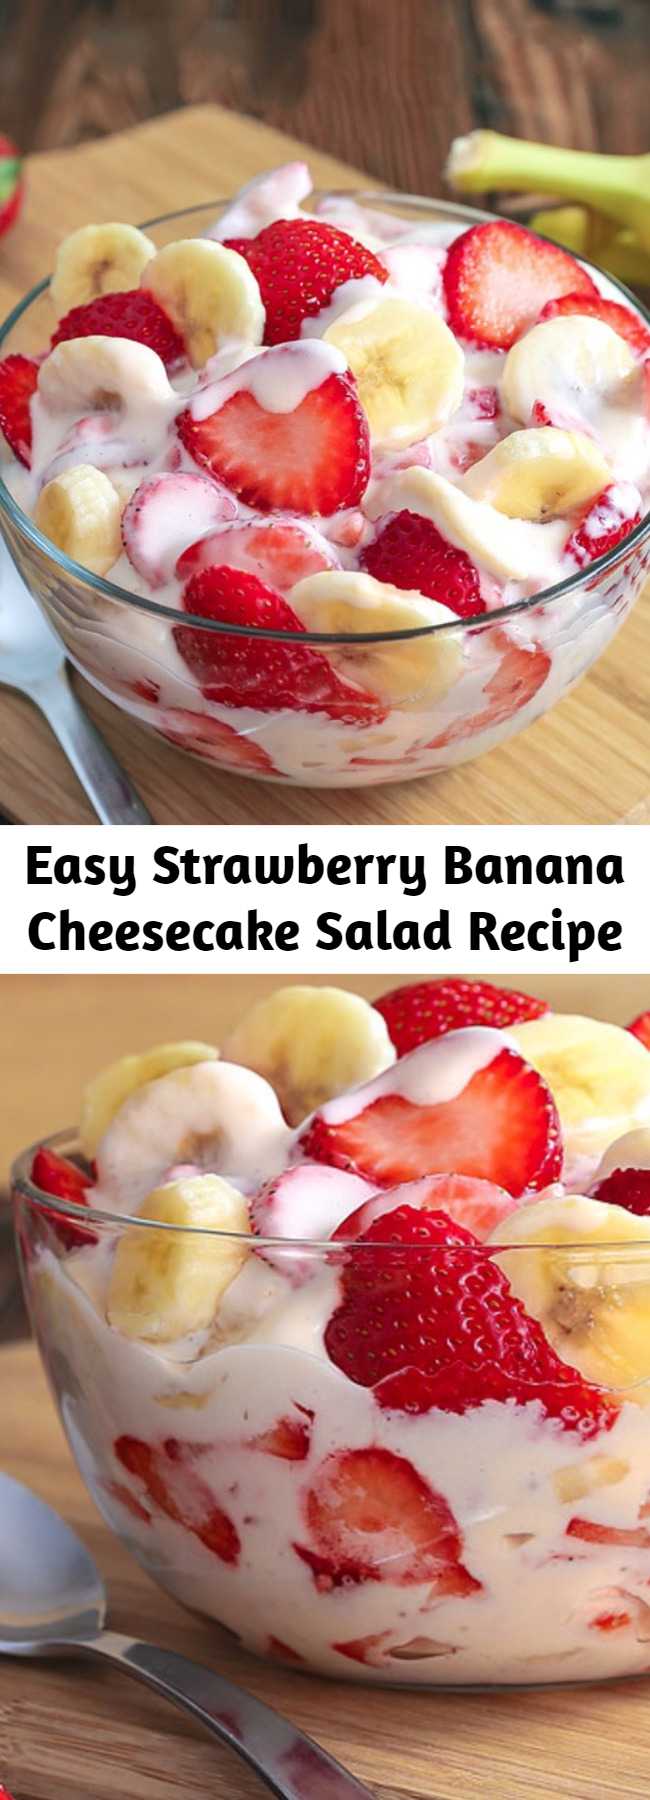 Easy Strawberry Banana Cheesecake Salad Recipe - Simple Strawberry Banana Cheesecake Salad recipe comes together with just 6 ingredients. Rich and creamy cheesecake filling is folded into luscious strawberries and sweet banana to create the most amazing, glorious fruit salad ever! #strawberries #potluckfood